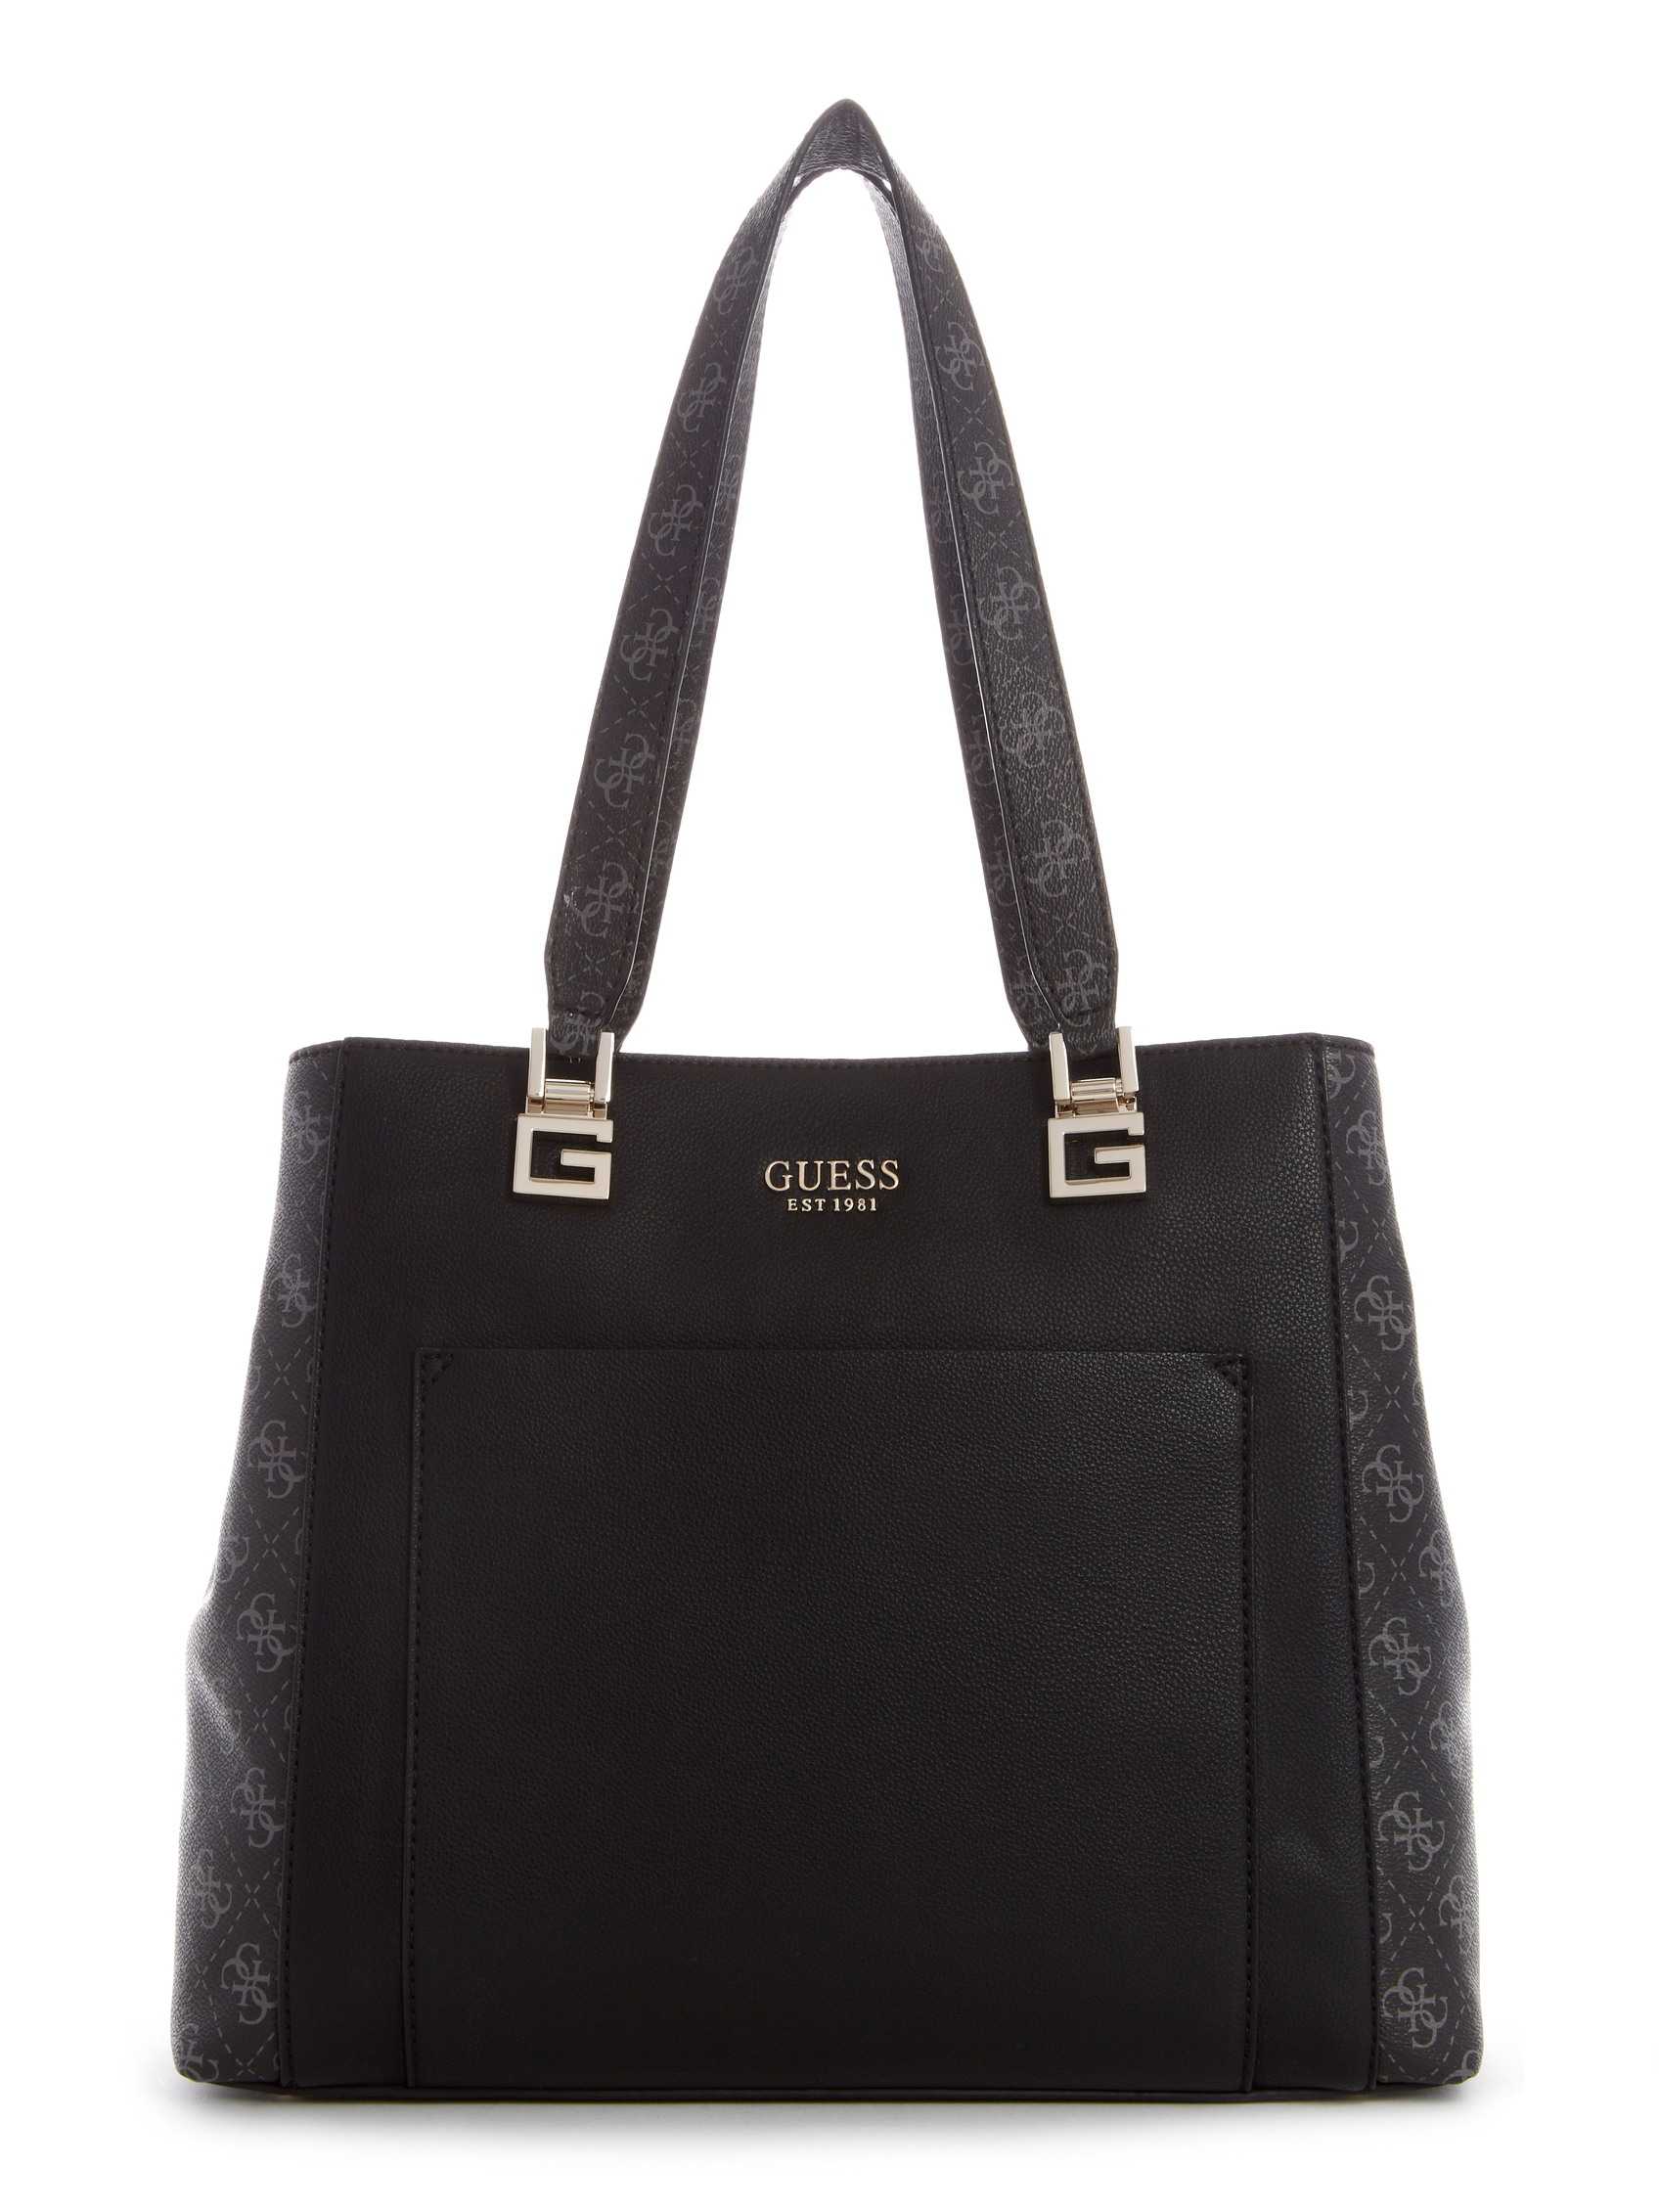 ENRICA GIRLFRIEND CARRYALL | Guess Philippines